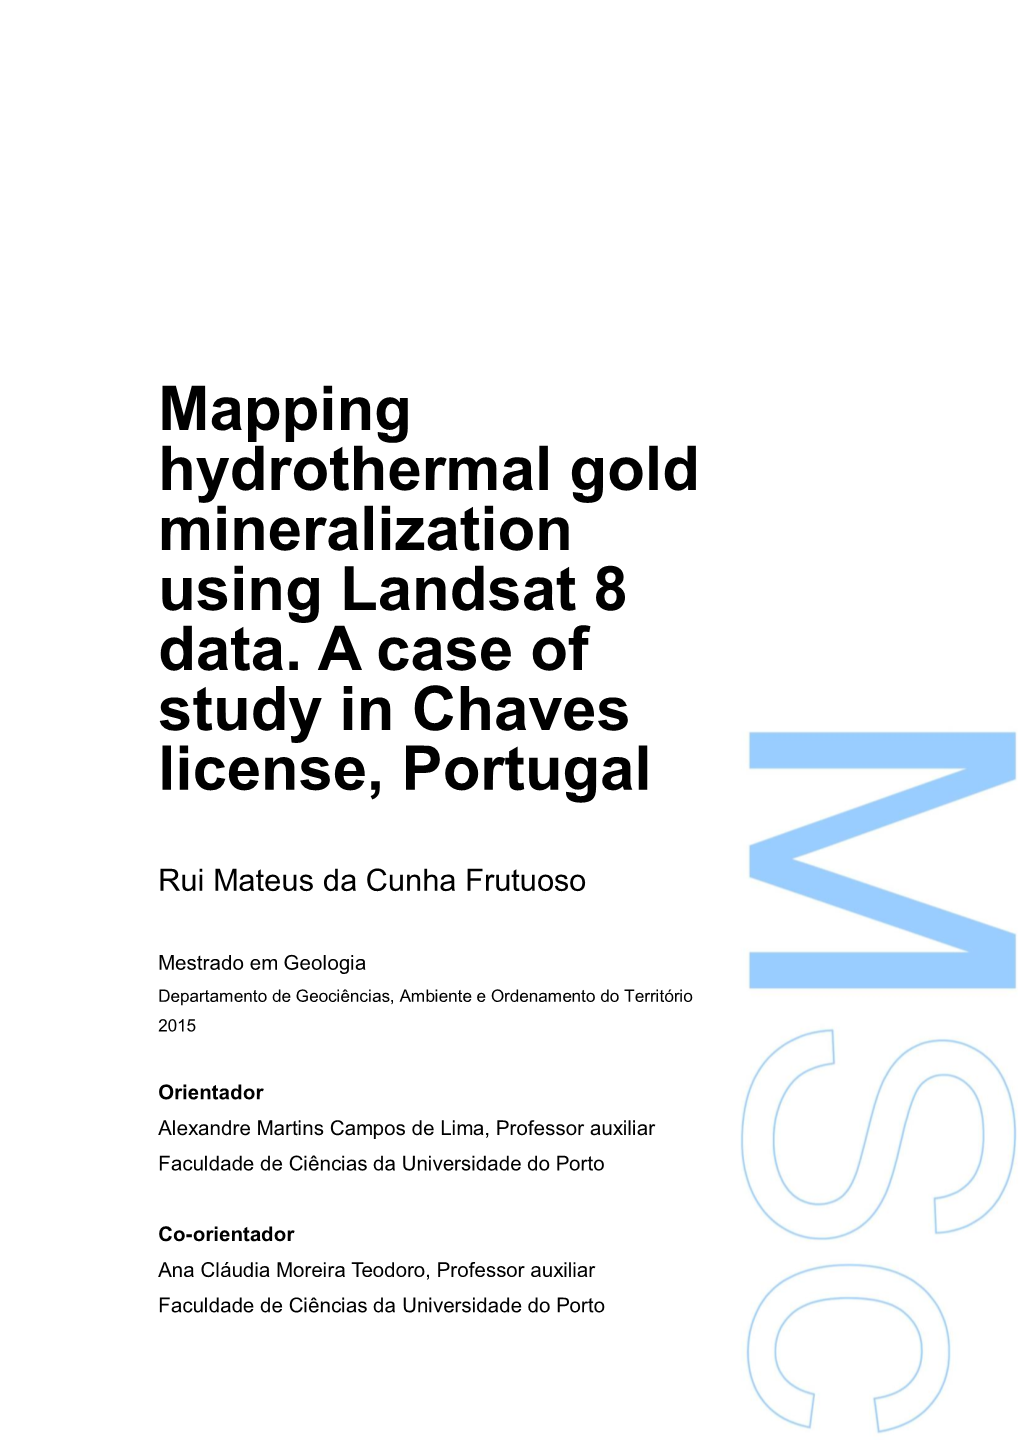 Mapping Hydrothermal Gold Mineralization Using Landsat 8 Data. a Case of Study in Chaves License, Portugal